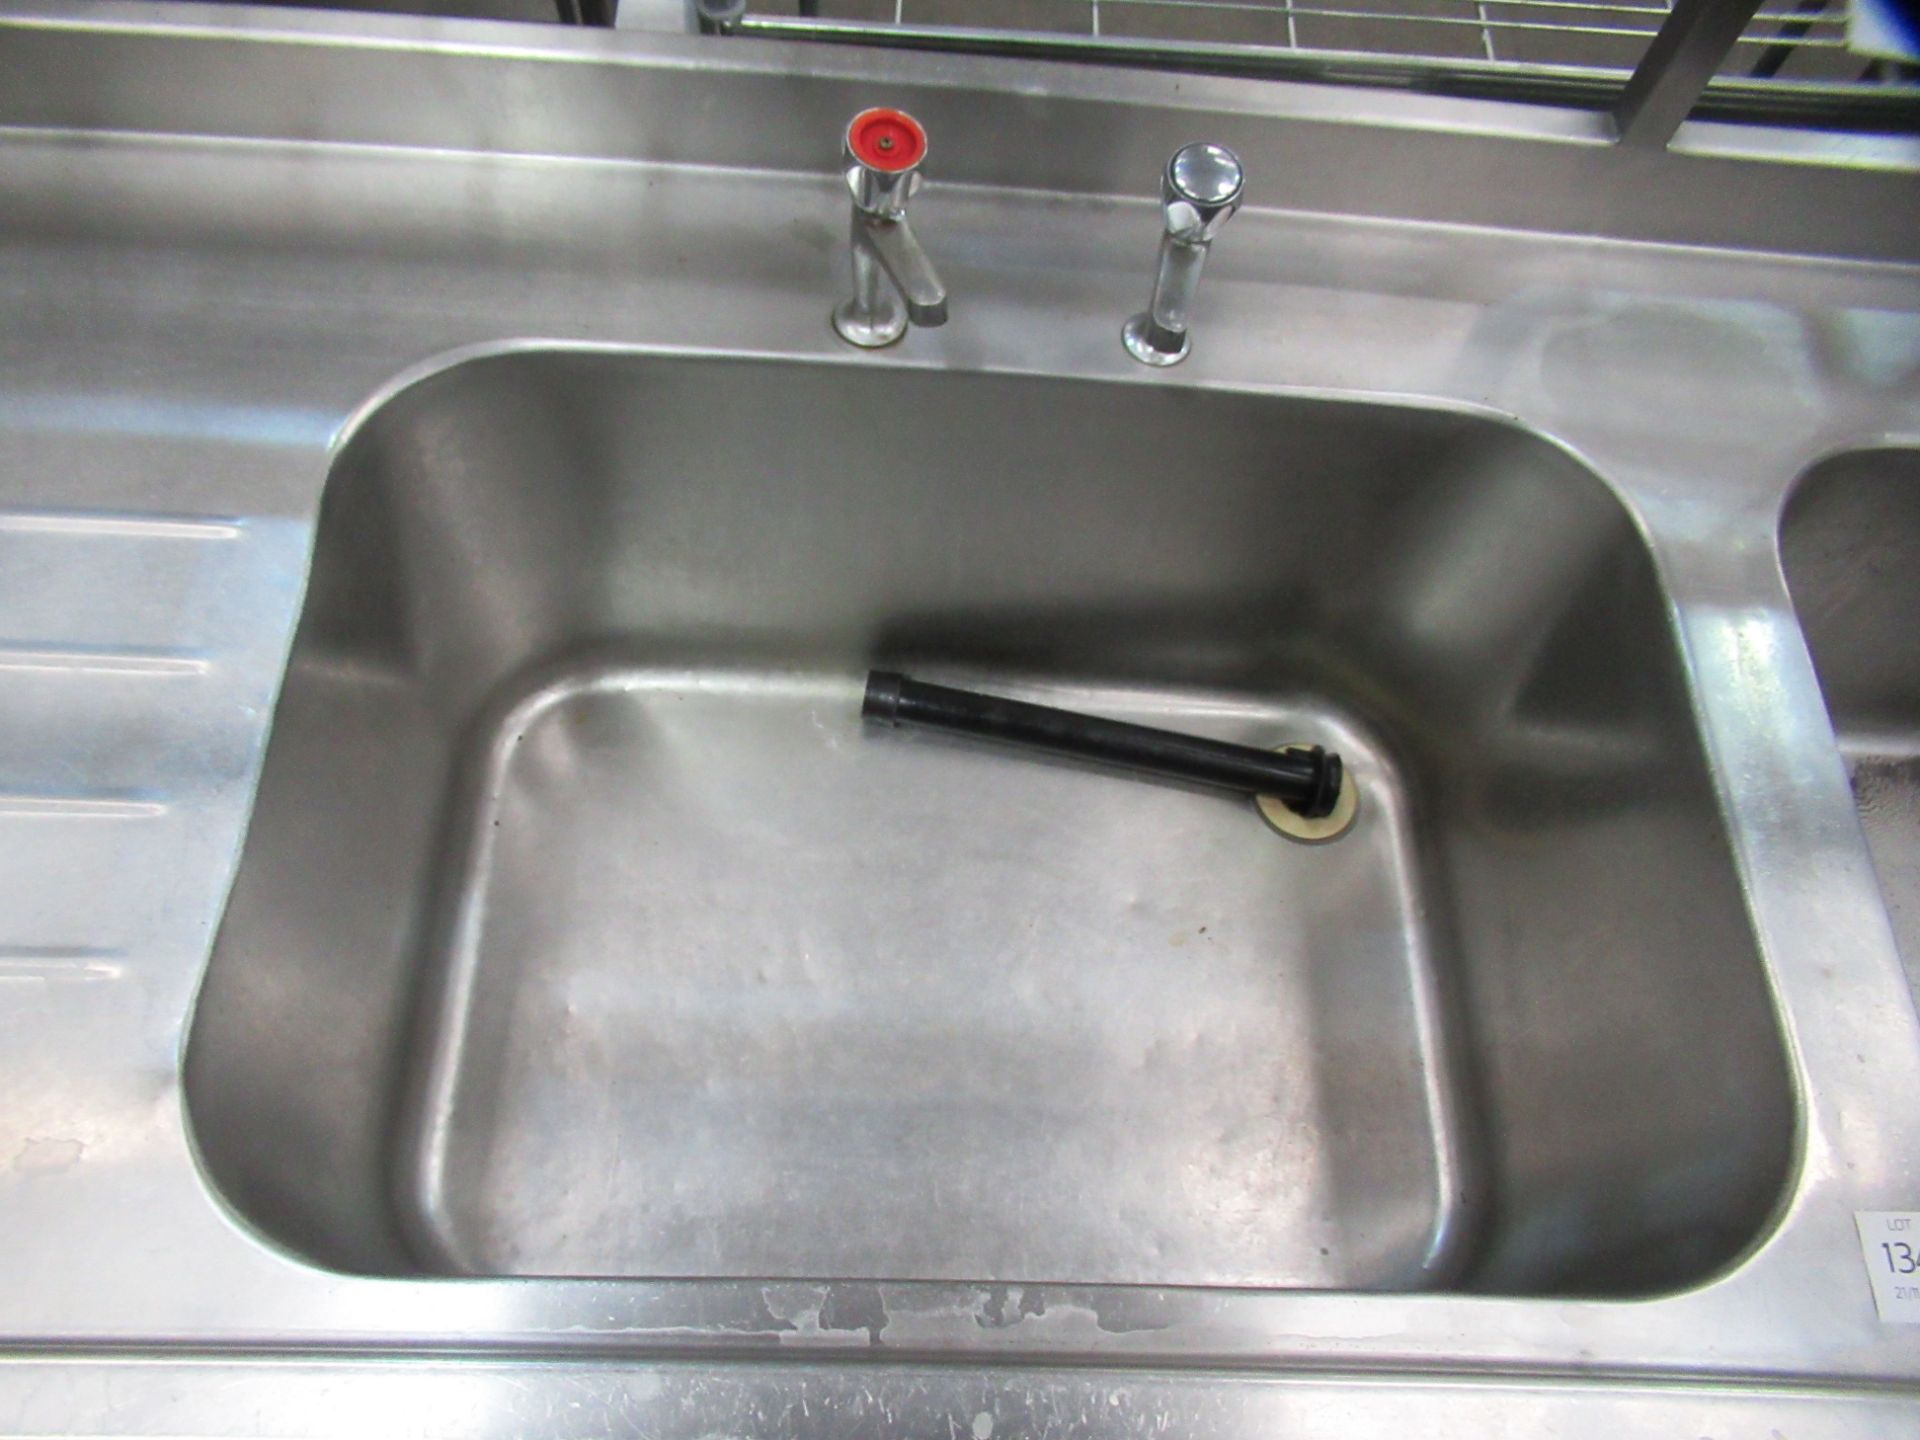 Large Stainless Steel Double Basin Sink Unit With Welded Rack & Under Tier - Image 3 of 4